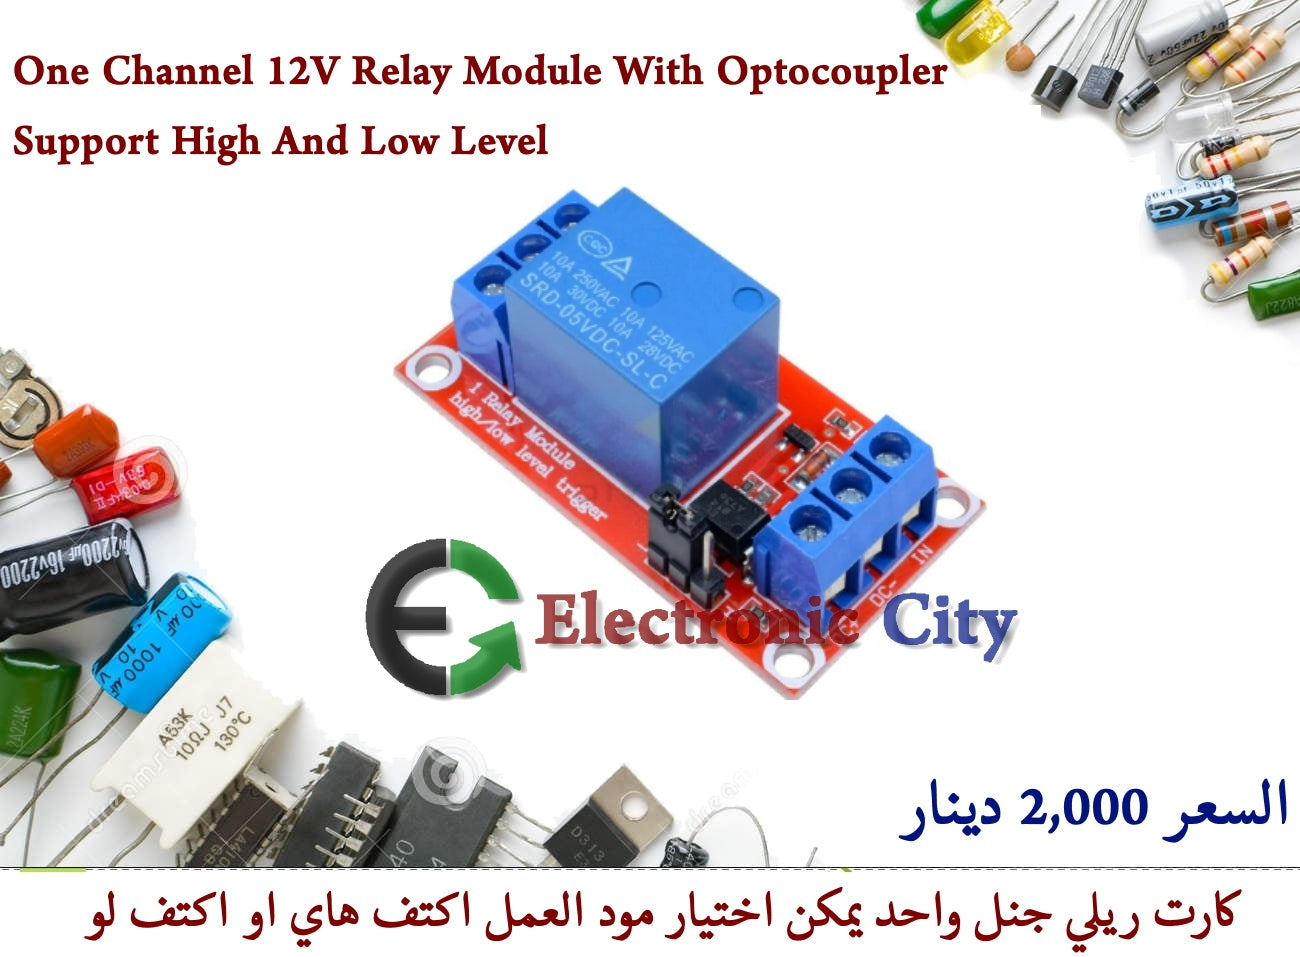 One Channel 12V Relay Module With Optocoupler Support High And Low Level #M5 011068